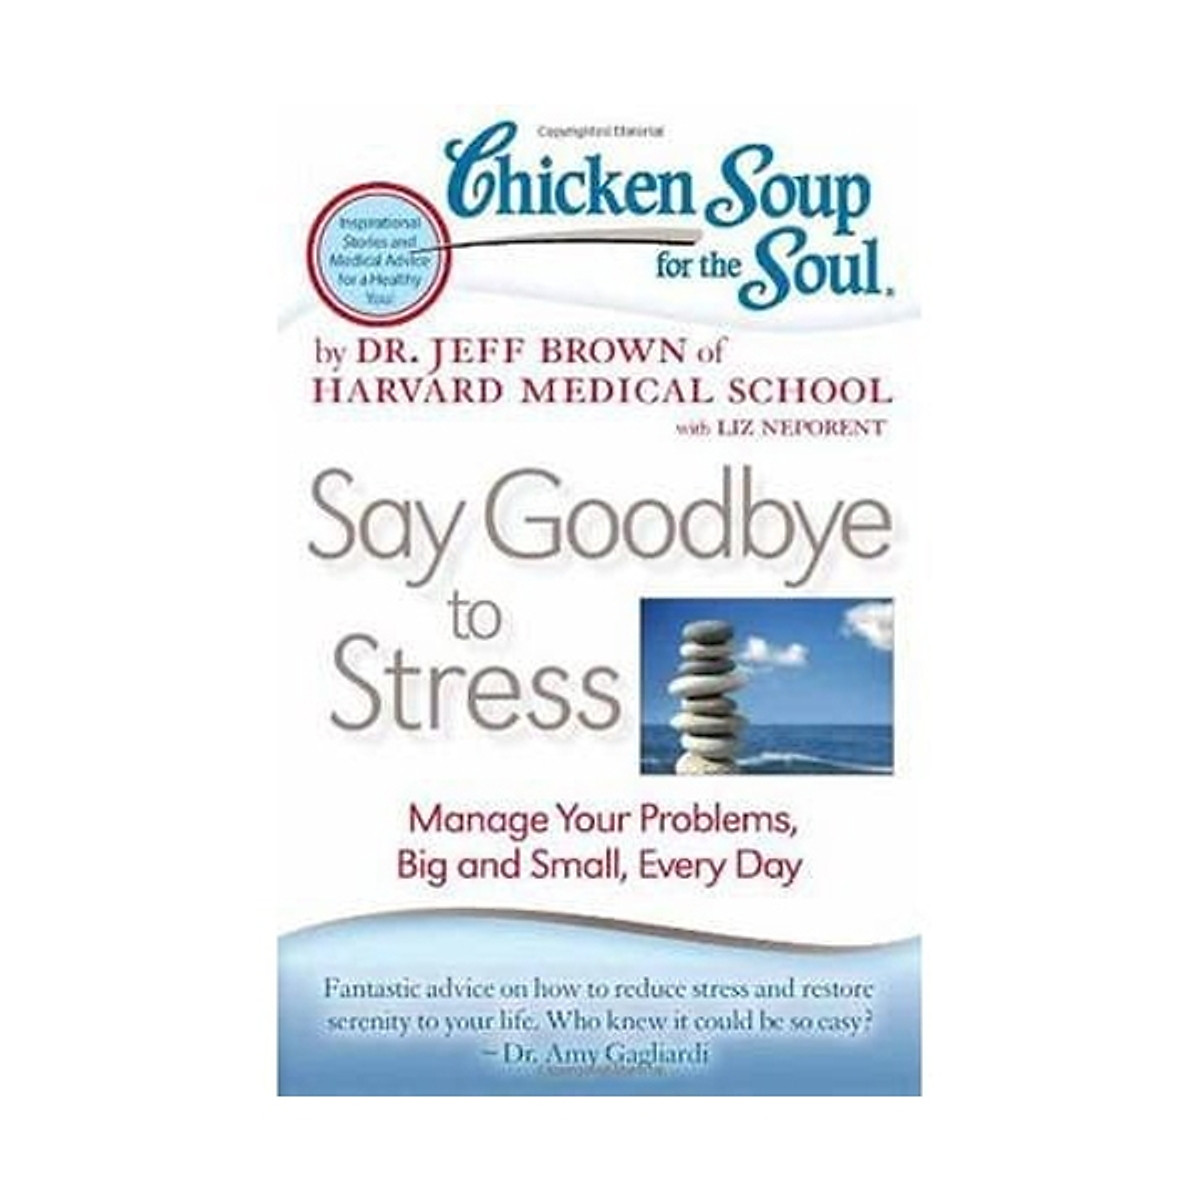 Chicken Soup for the Soul: Say Goodbye to Stress: Manage Your Problems, Big and Small, Every Day